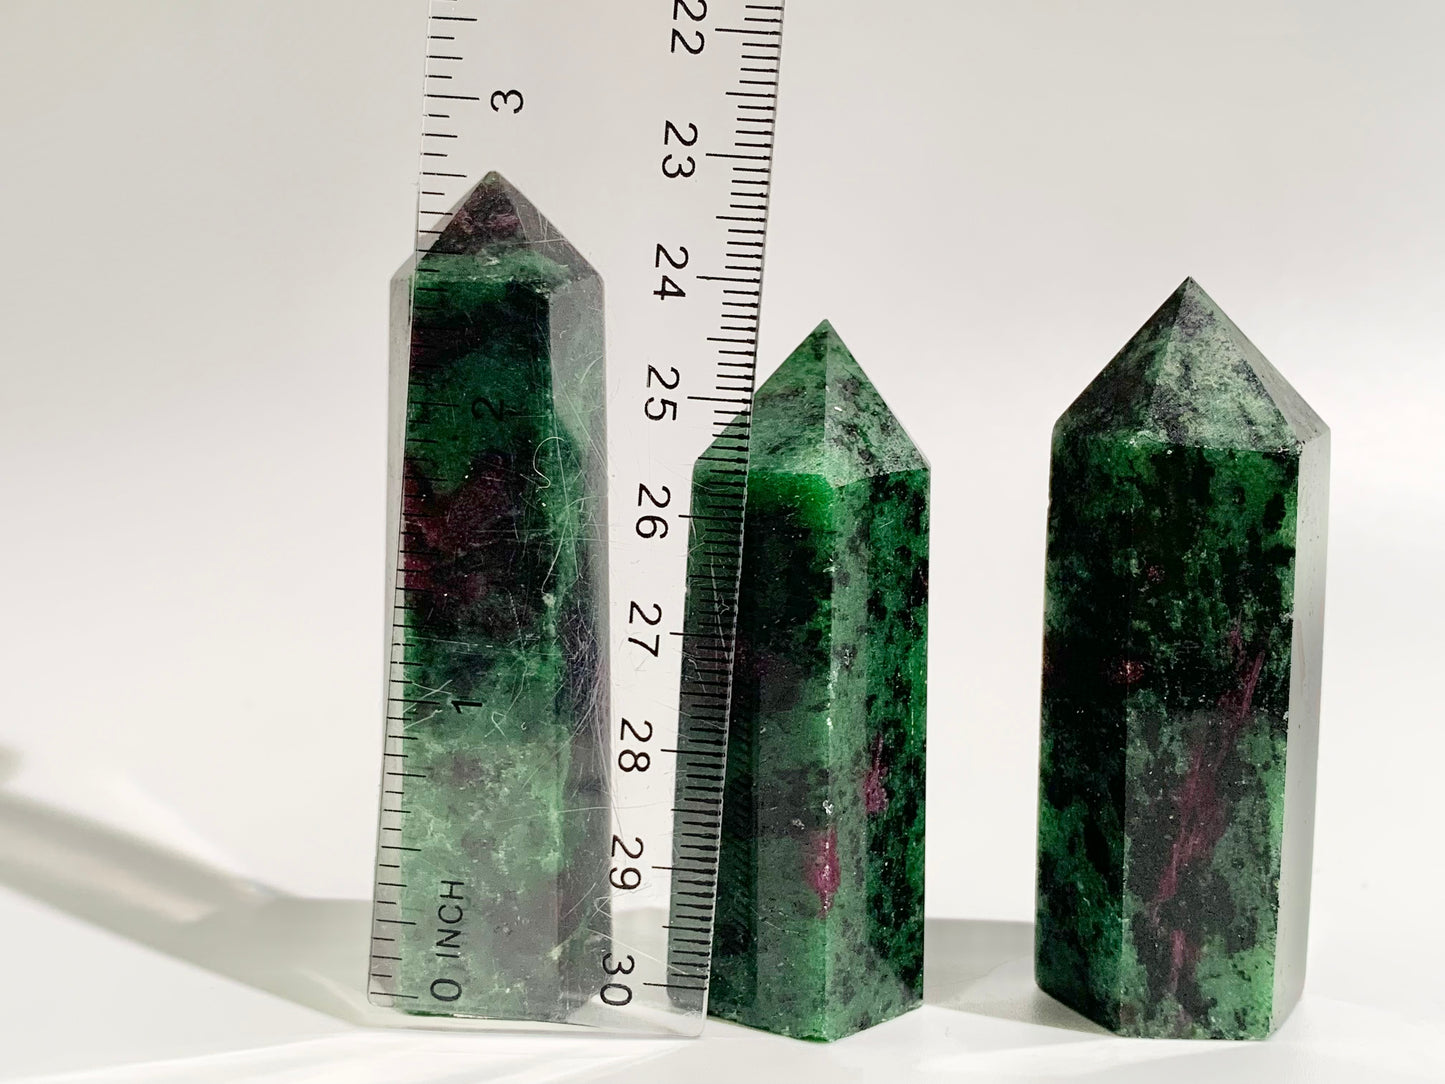 Ruby in Zoisite Tower, 2.3-2.4oz